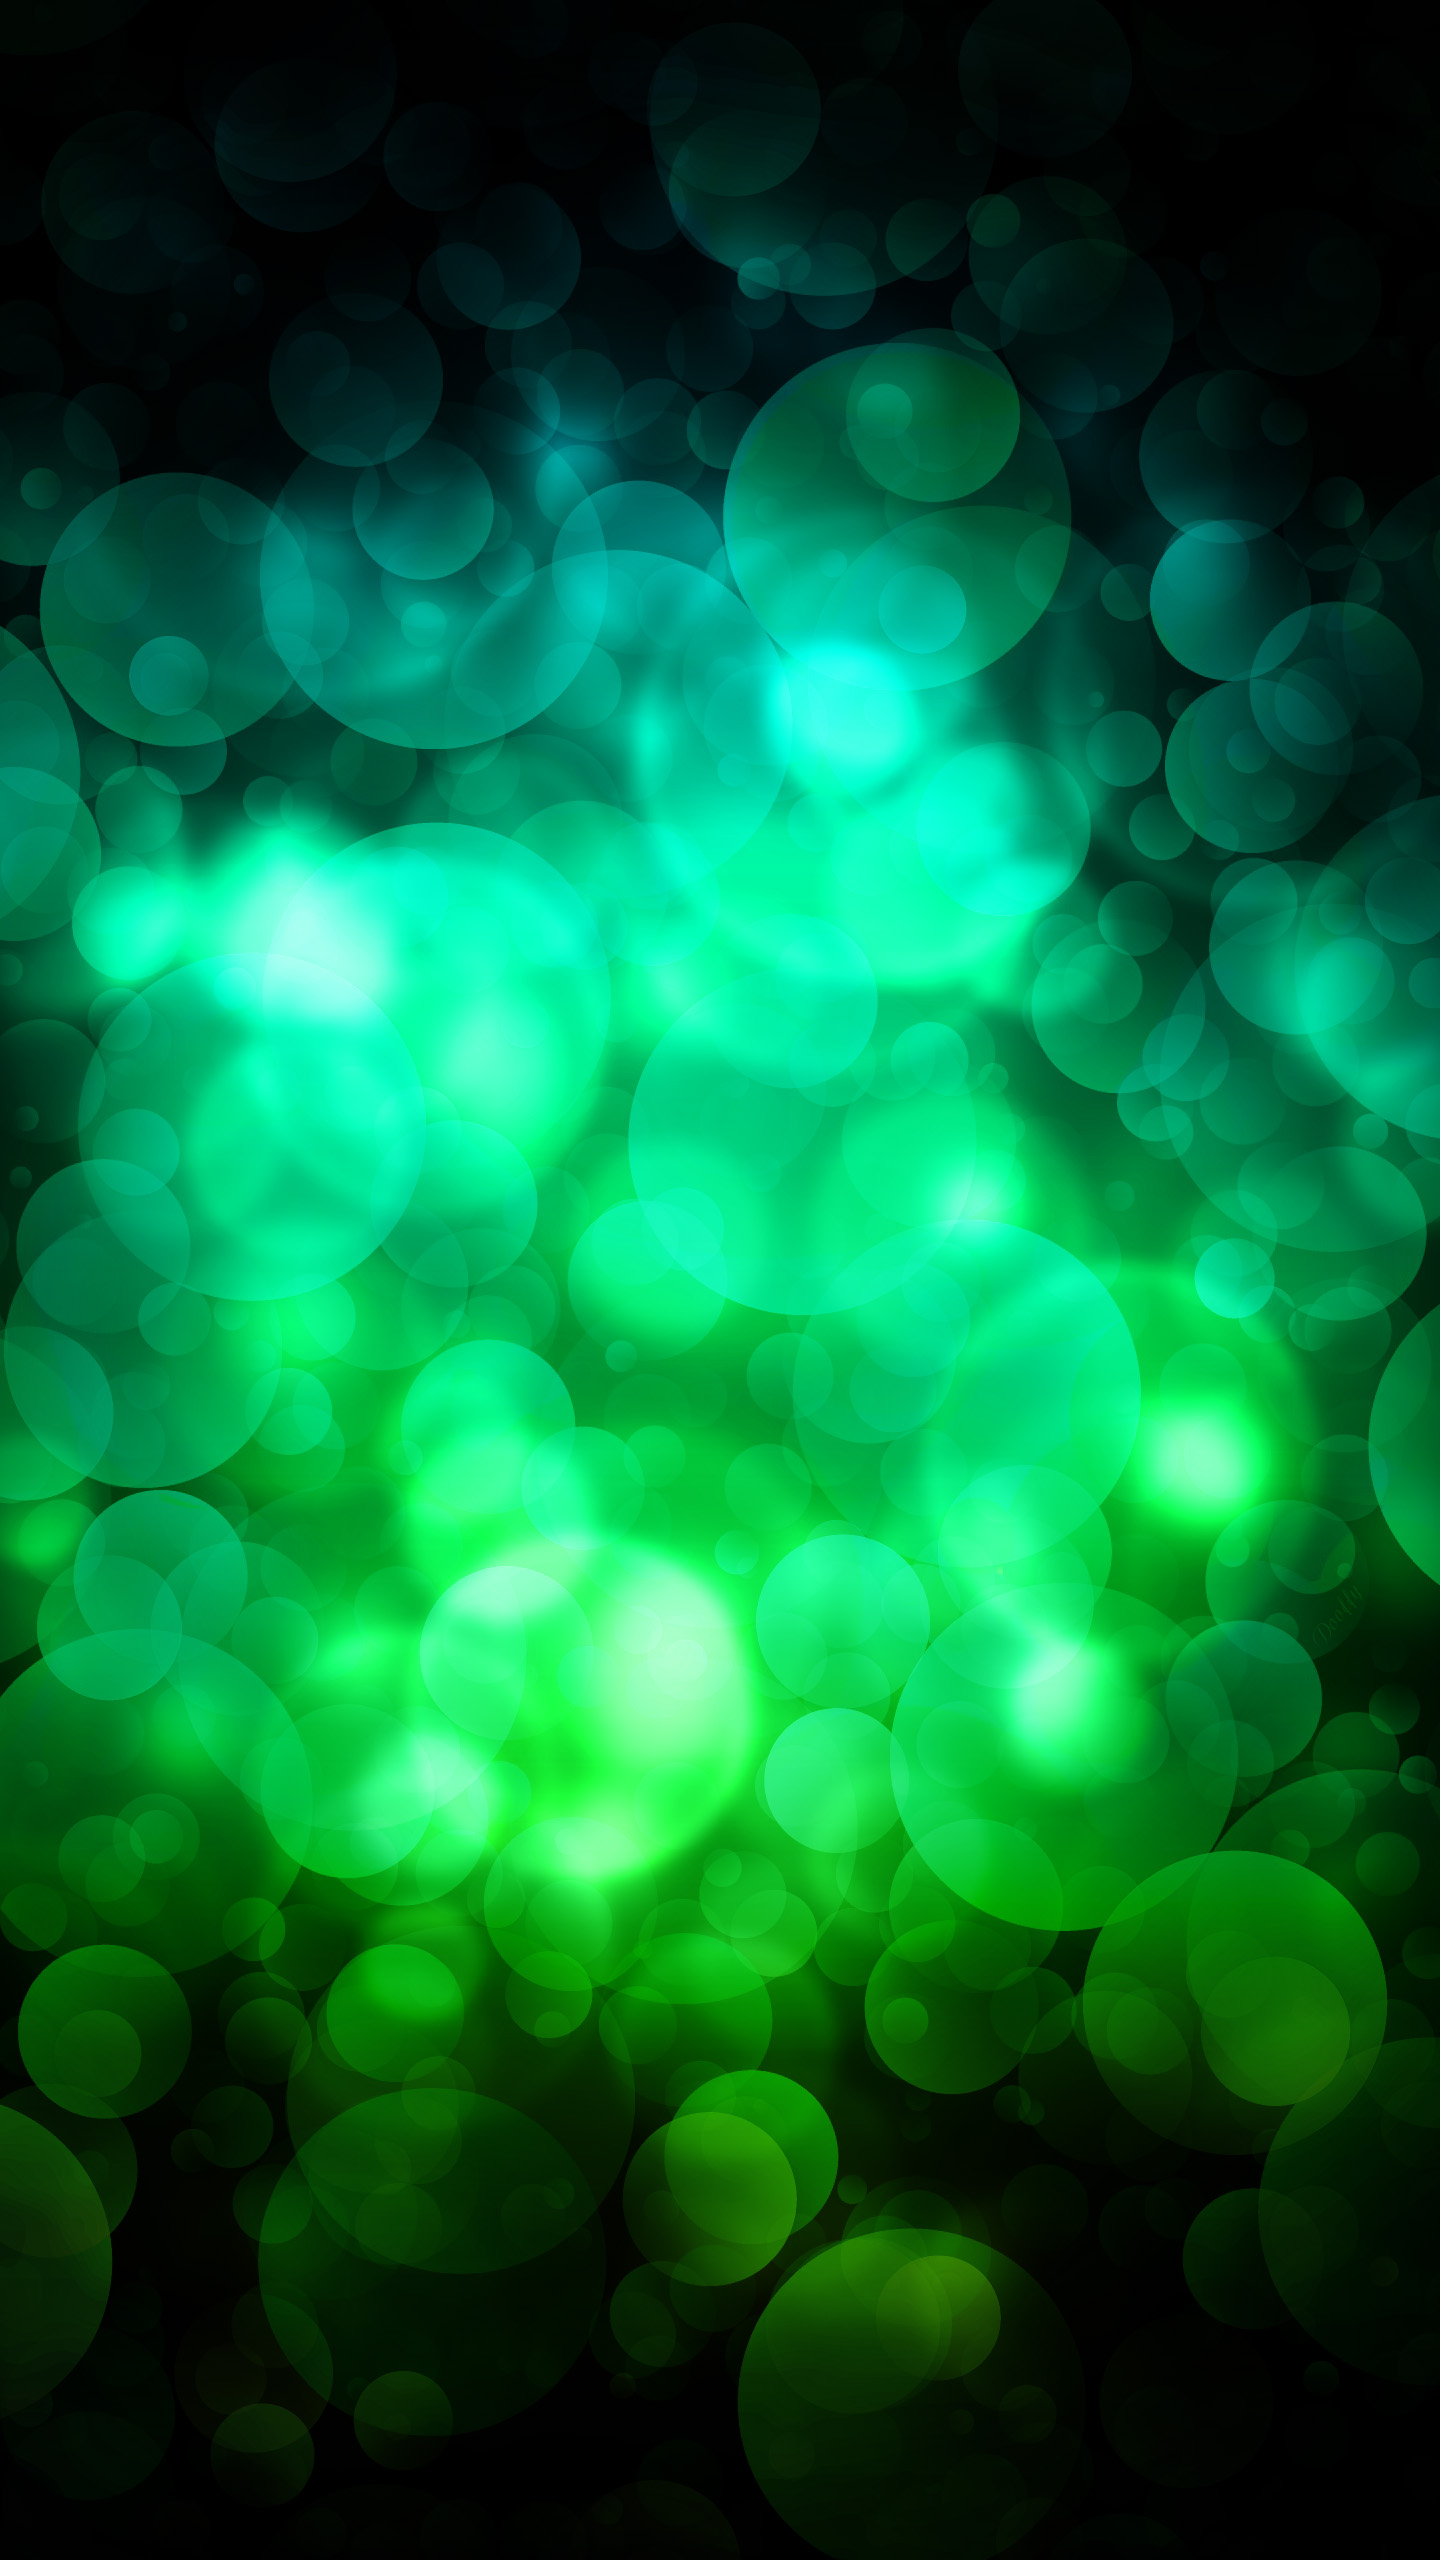 Quad Hd Mobile Phone Wallpapers Green Circles - Phone Wallpaper Hd Green - HD Wallpaper 